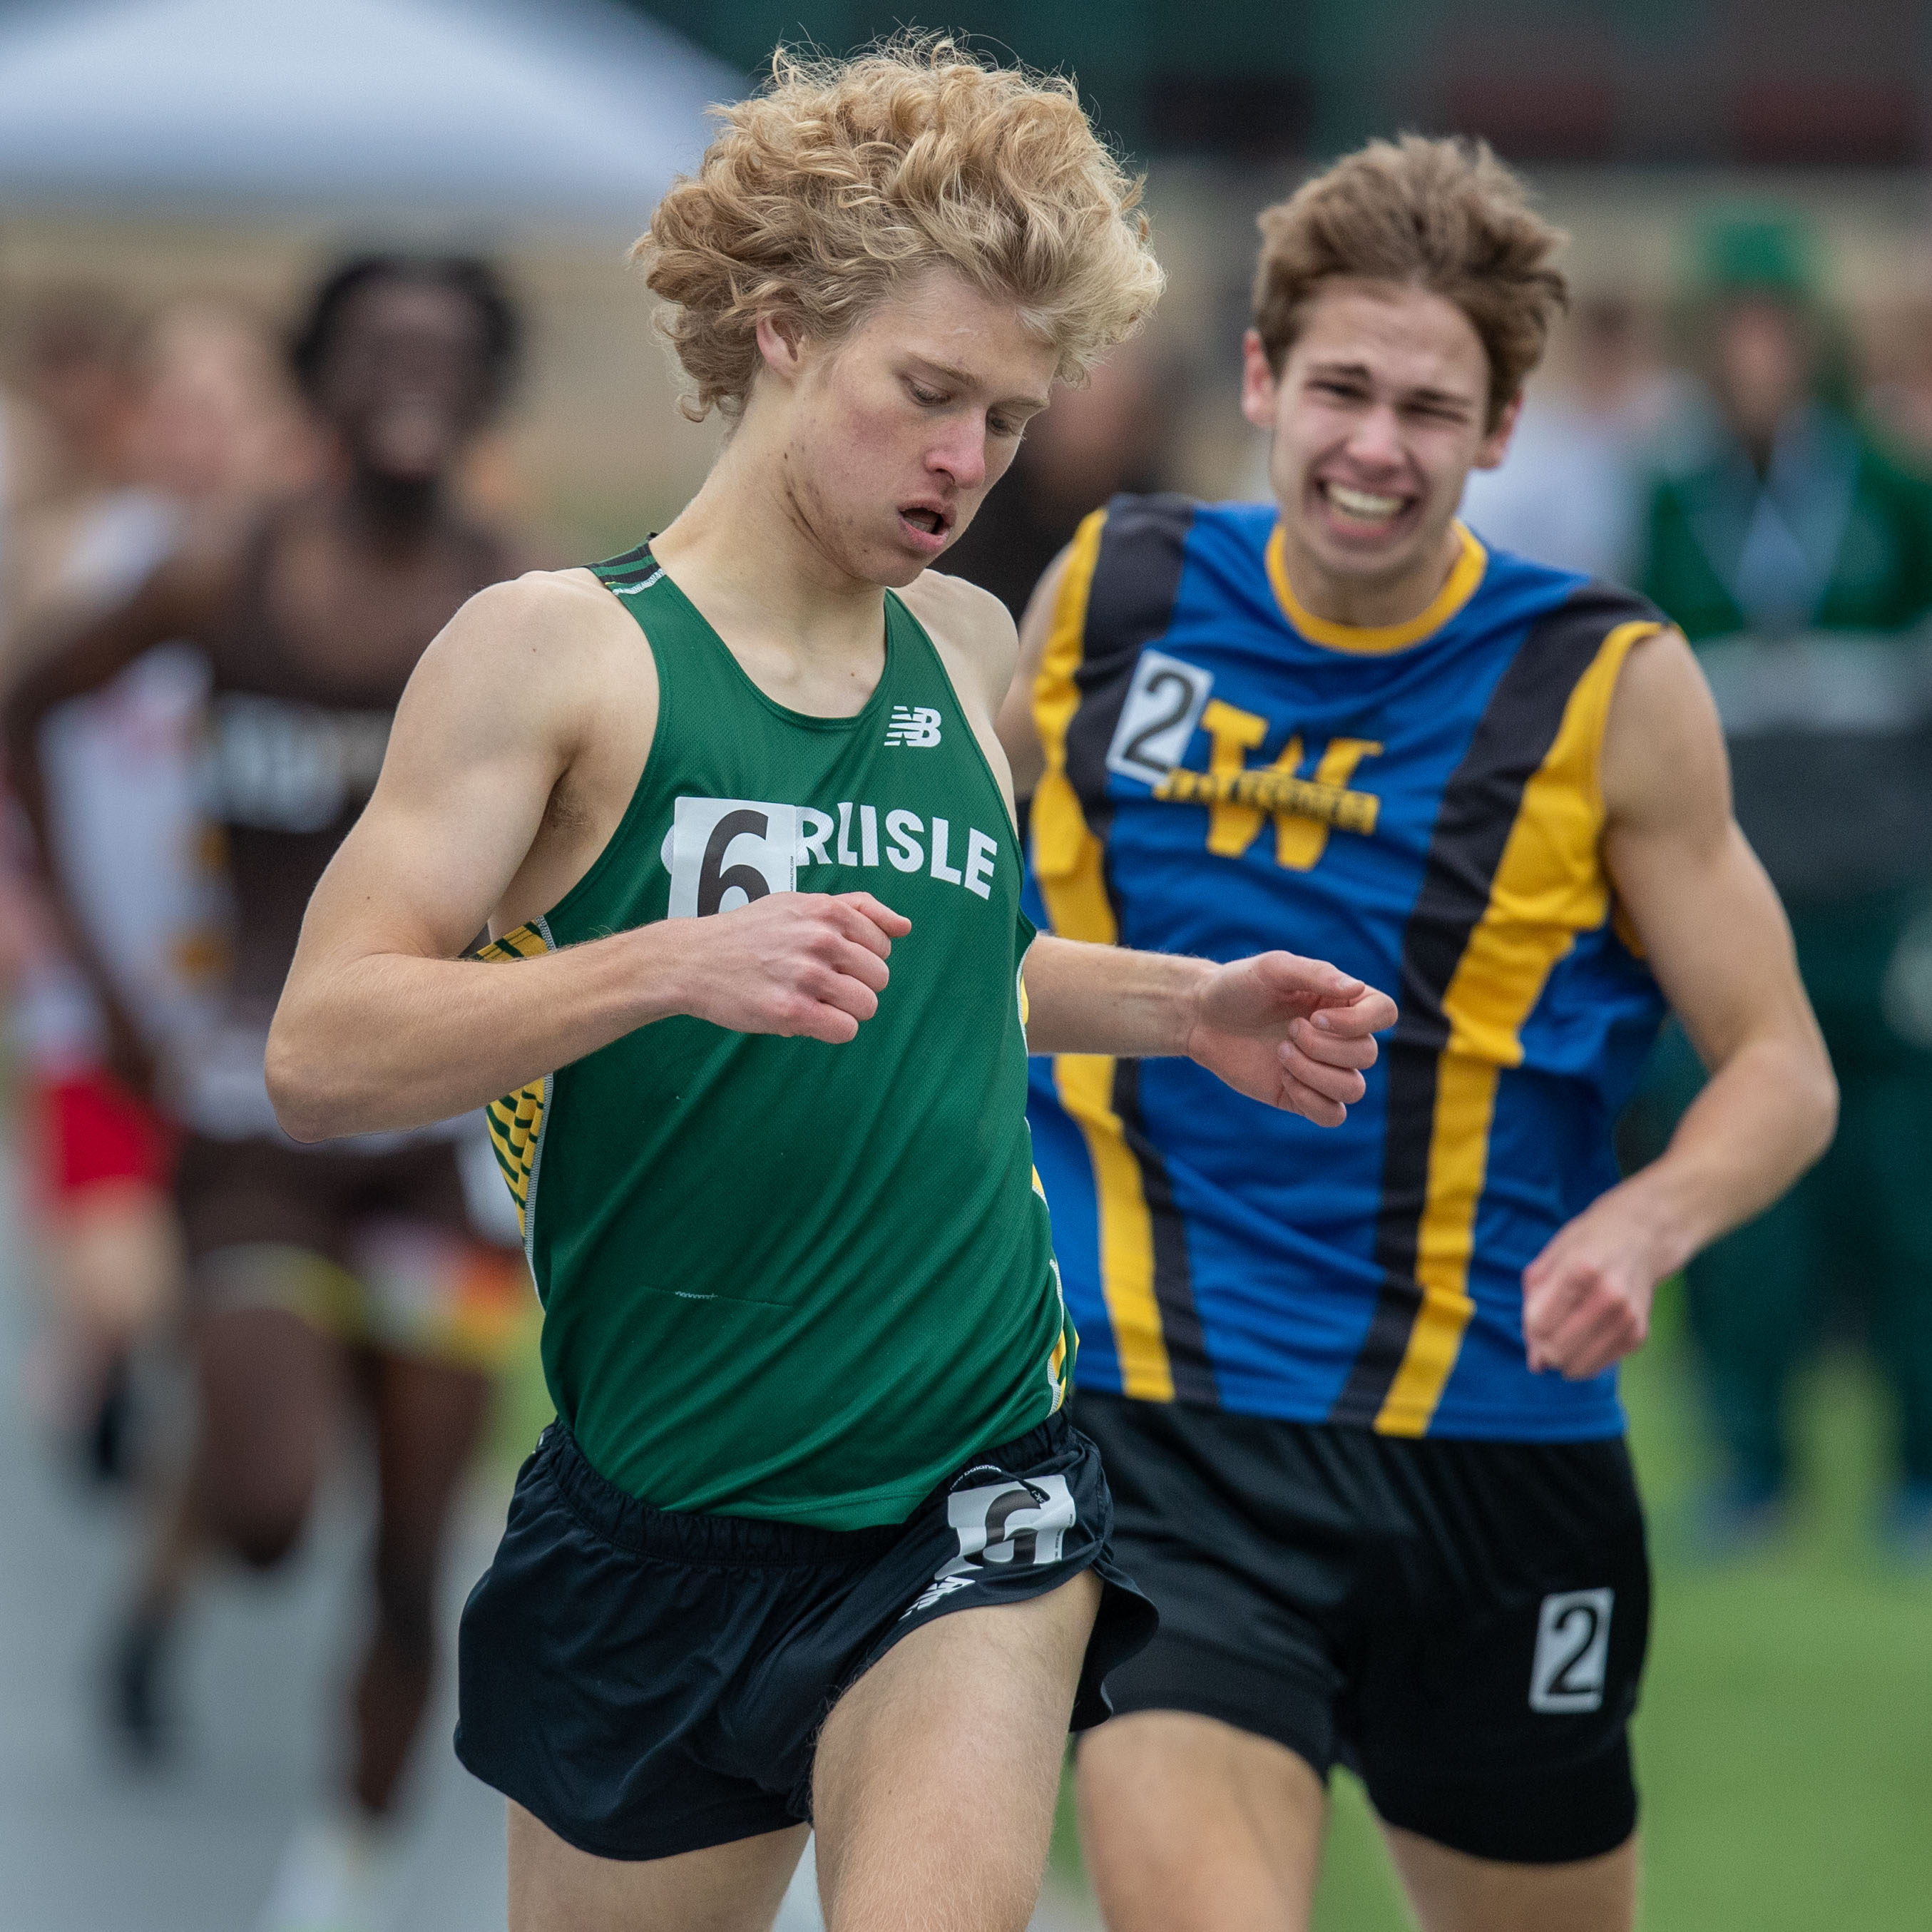 Carlisle’s Andrew Diehl finishes second in the 800 meter race at the 2023 Tim Cook Memorial Invitational track & field meet at Chambersburg, Pa., Mar. 25, 2023.Mark Pynes | pennlive.com